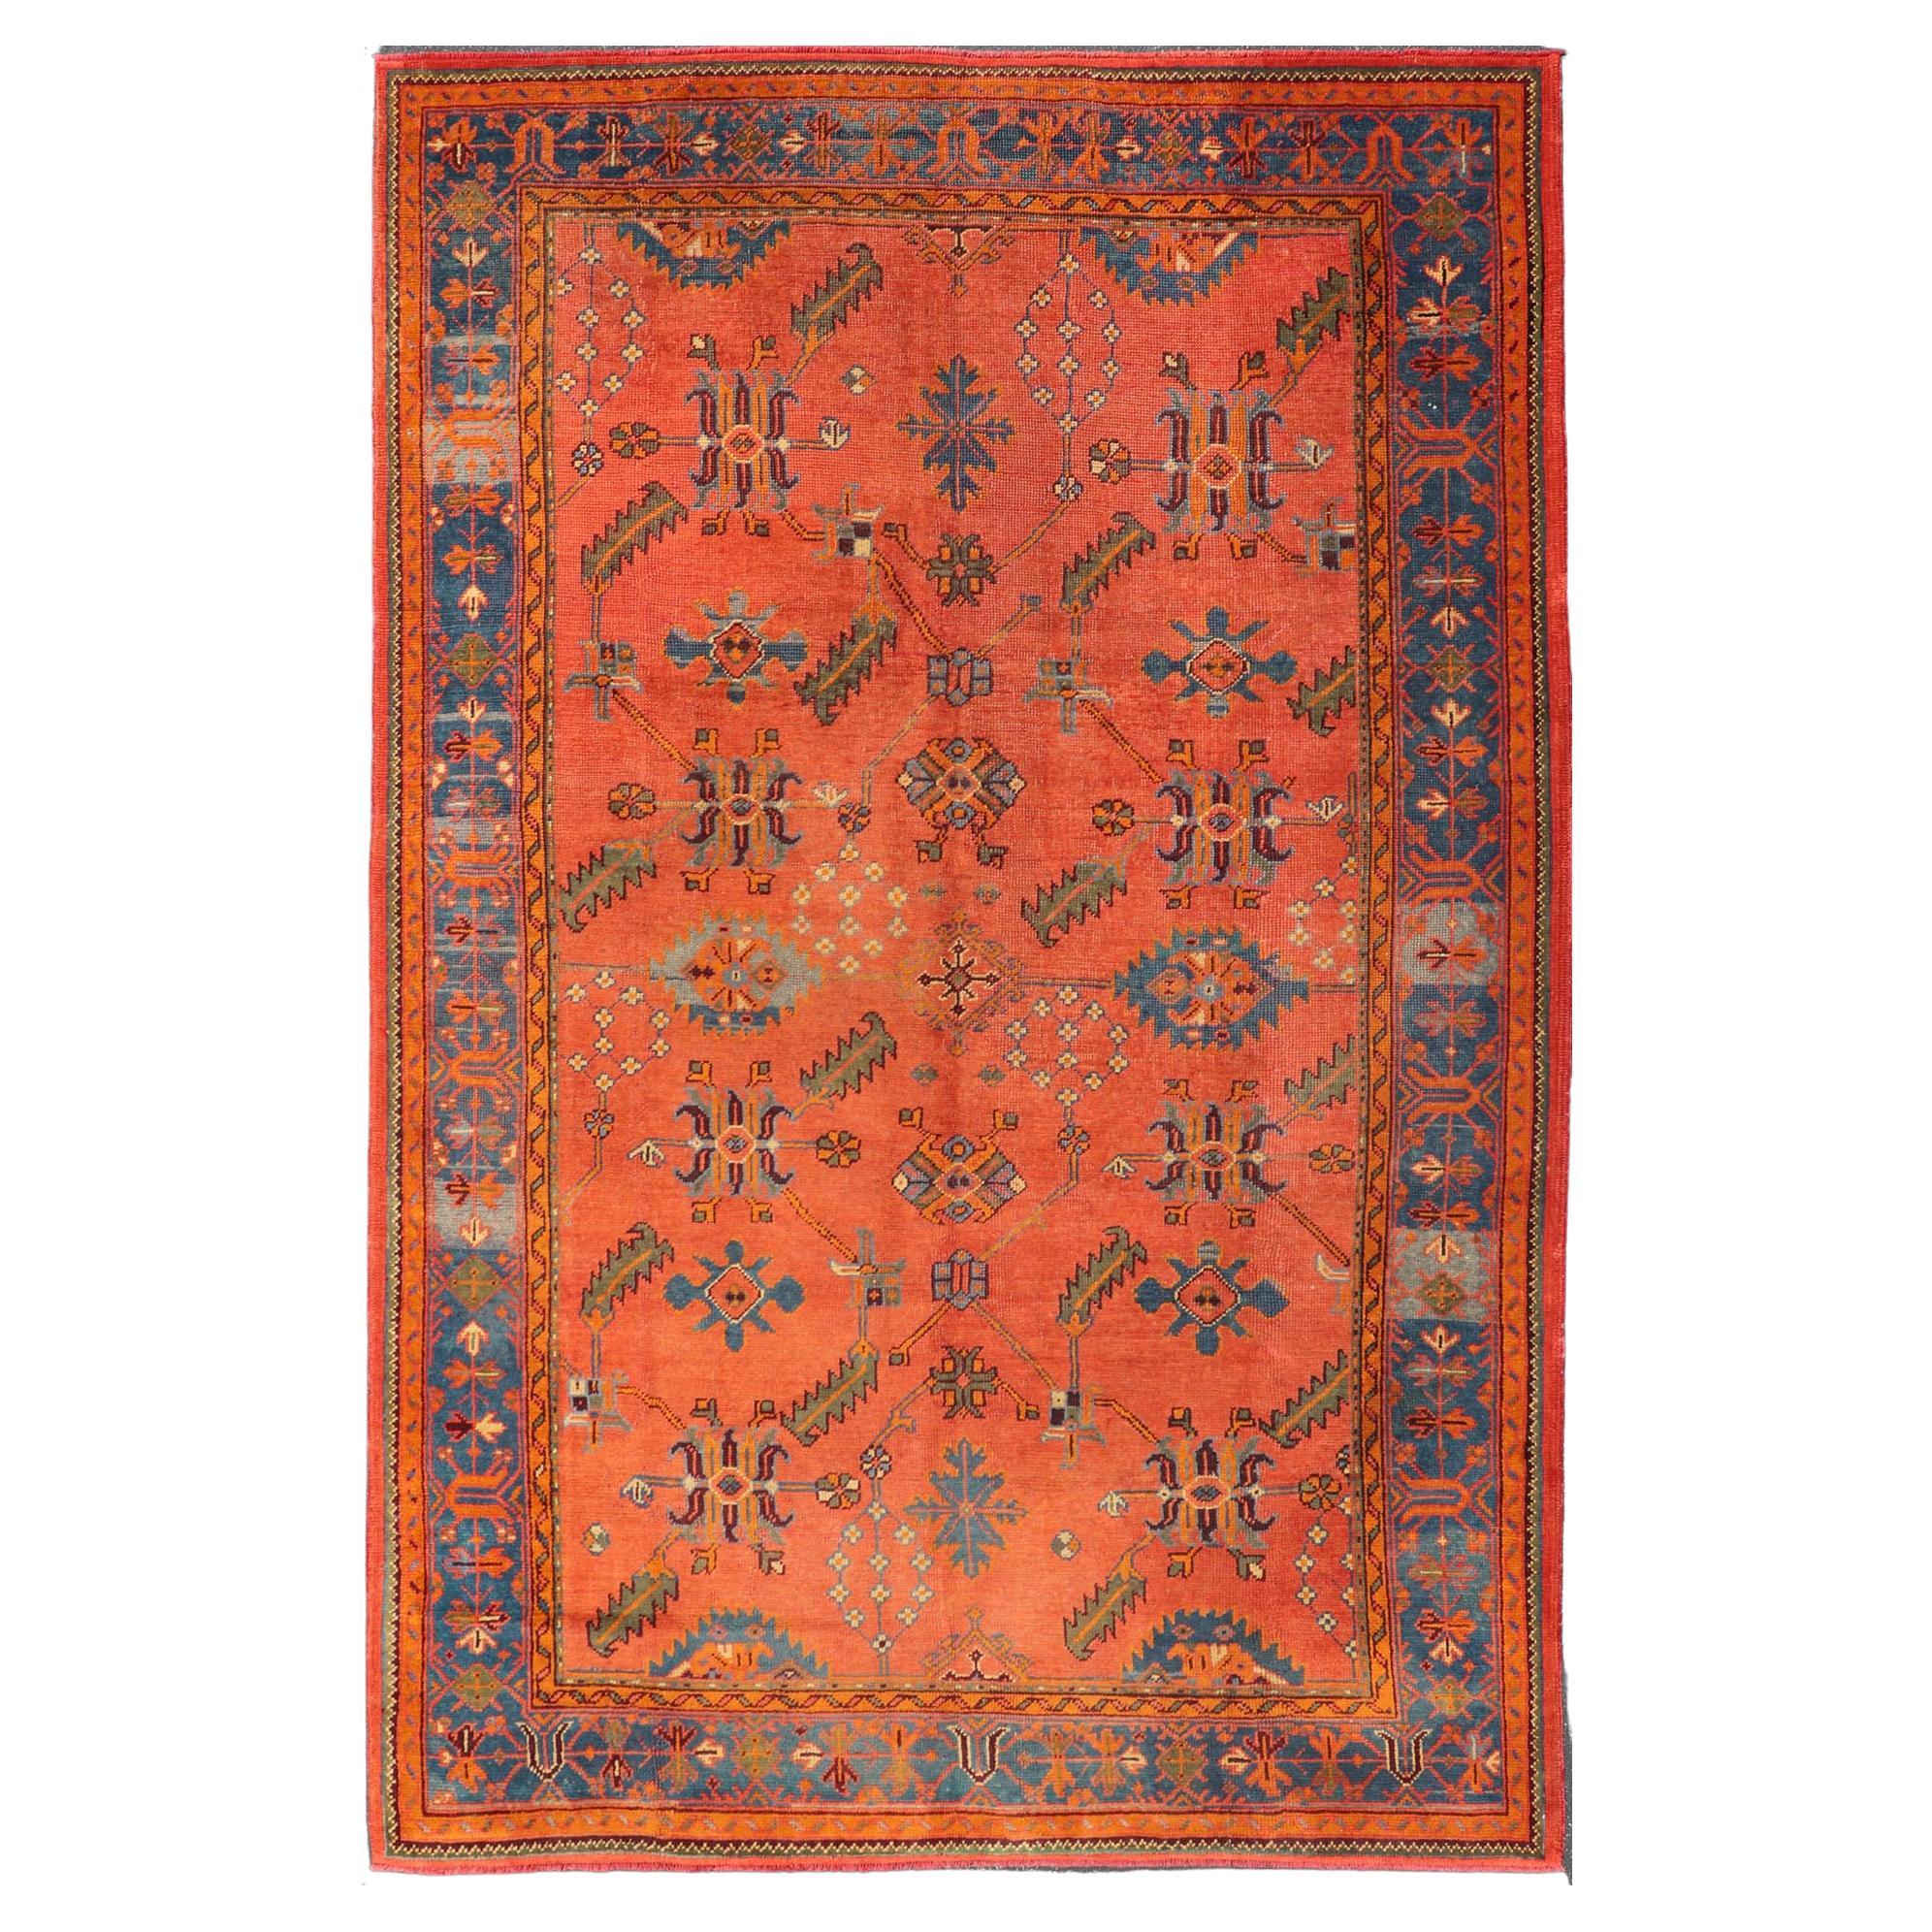 Antique Turkish Oushak Colorful Rug With All-Over Design In Salmon and Blue's  For Sale